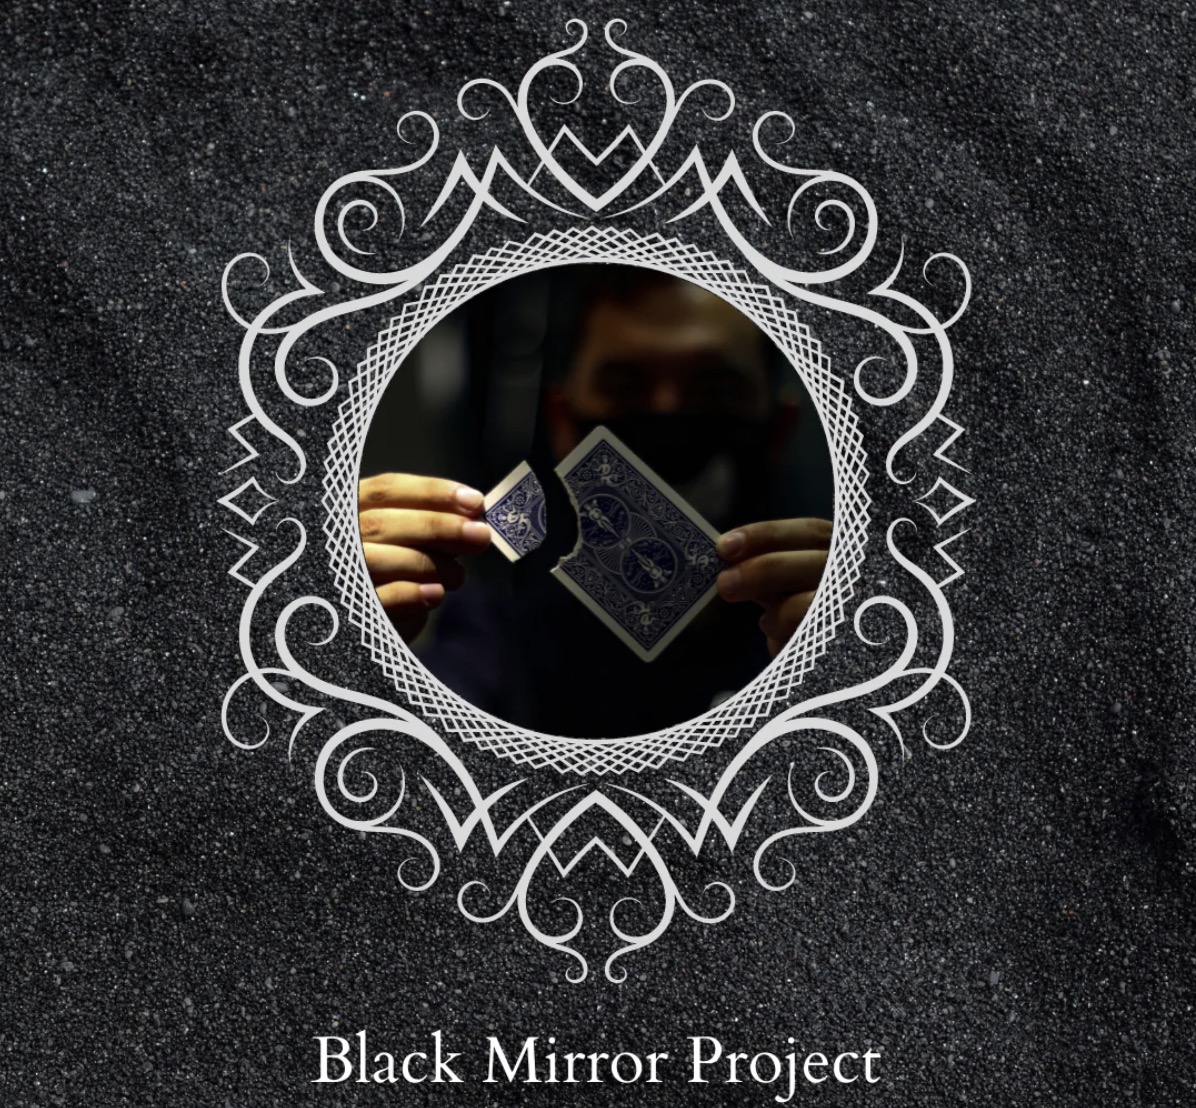 The Black Mirror Project by Robert Lupu (Mp4 Video Download)